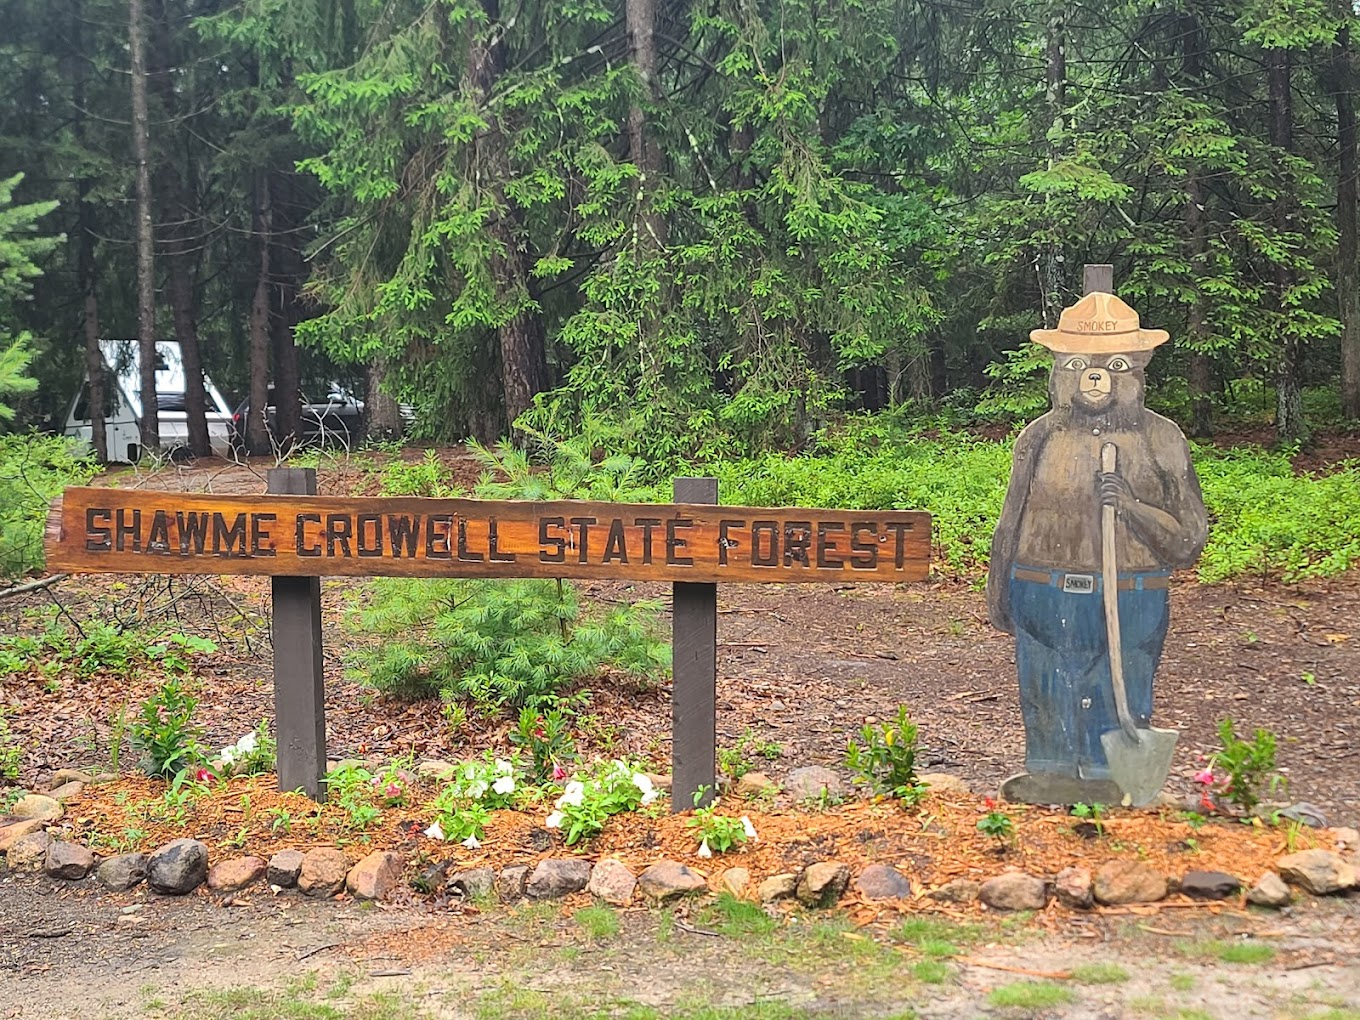 Shawme-Crowell State Forest